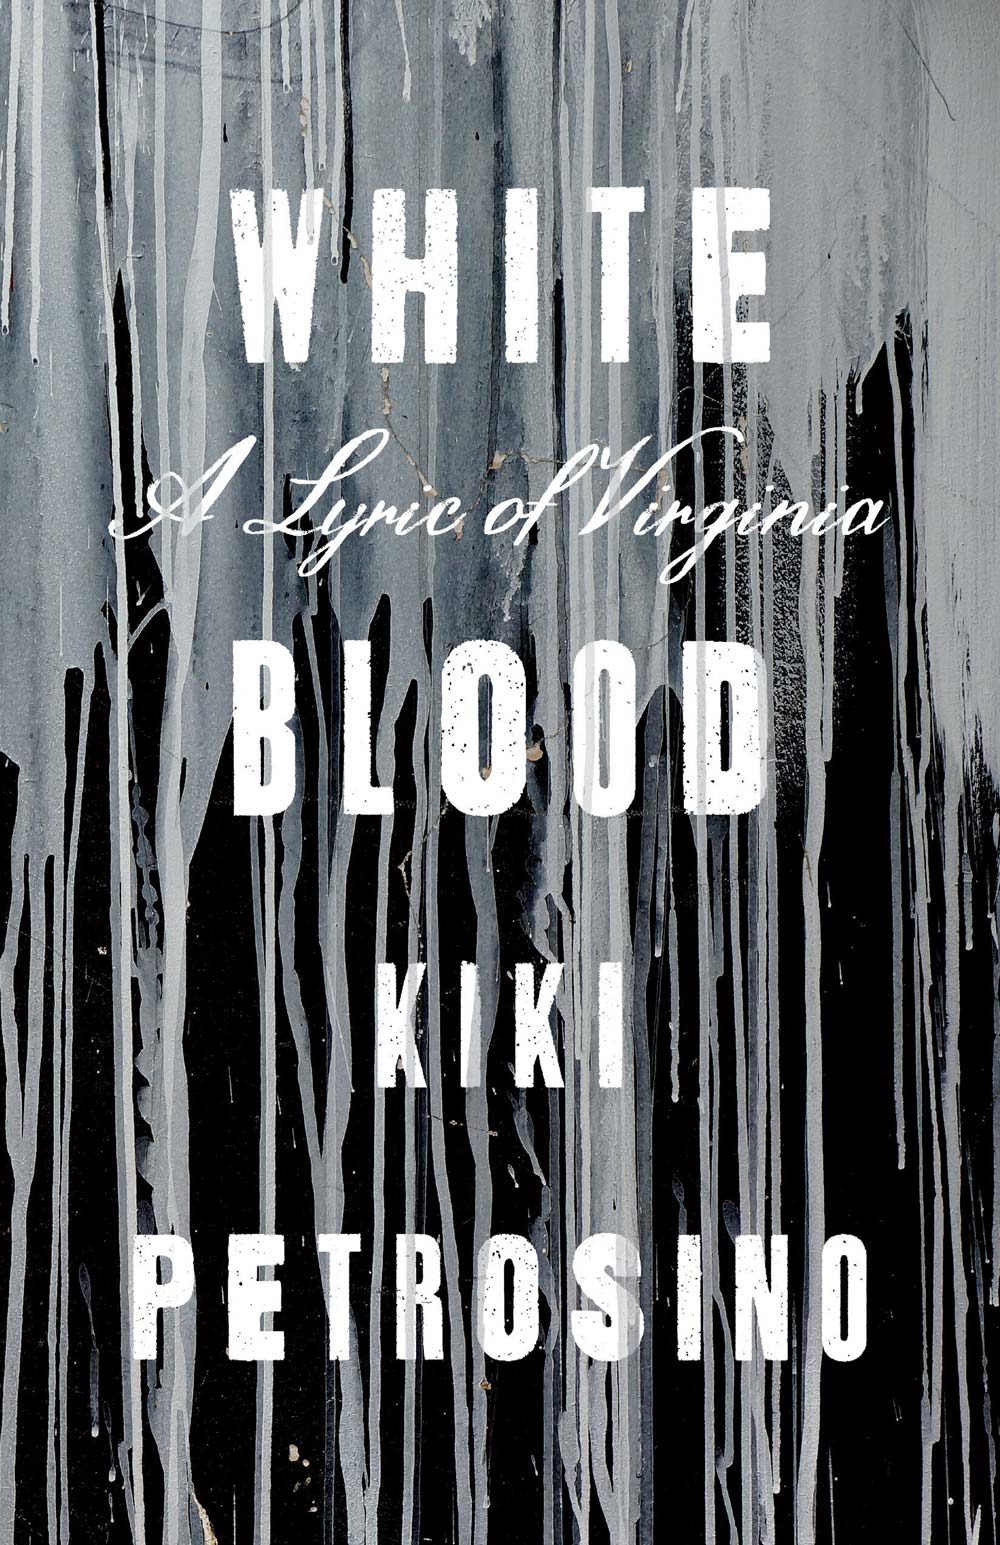 Book cover that reads: White Blood: A Lyric of Virginia